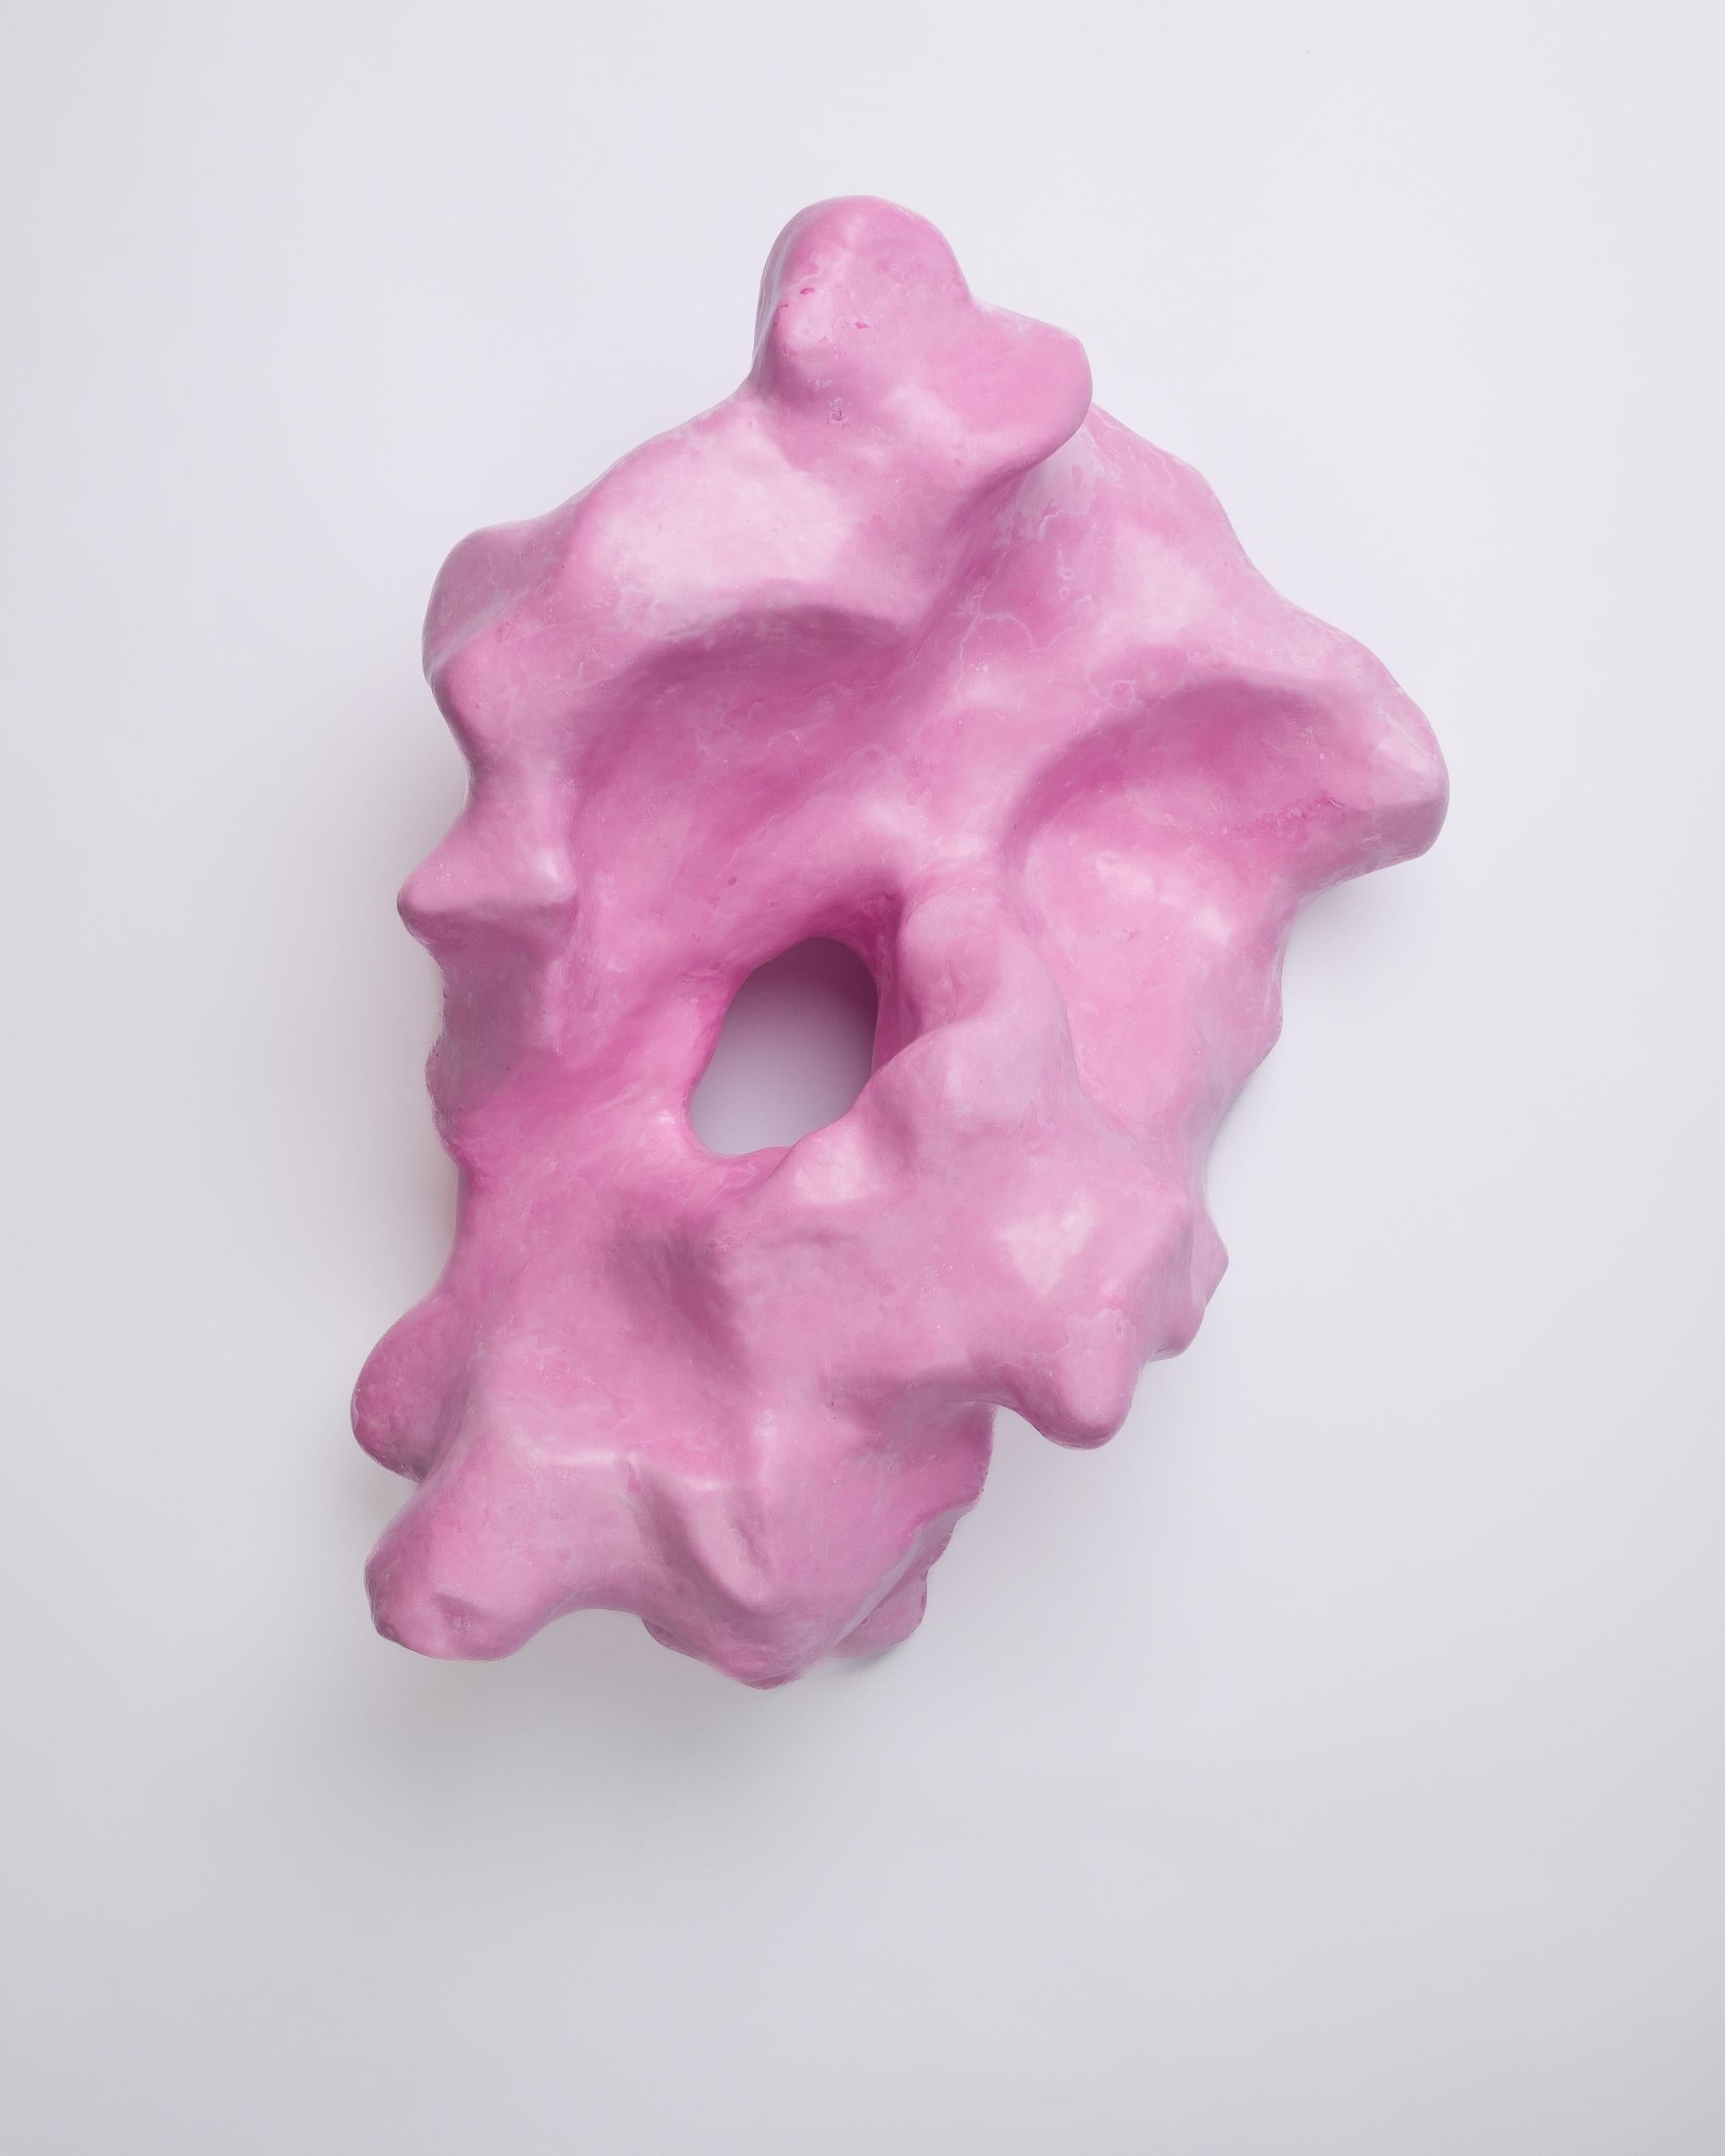 Maximalism wall sculpture by Studio Gert Wessels, in pink. handcrafted in an organic shape and made in his studio in the Netherlands. Including mounting system.

In his daily practice he investigates the relationship between form and function. The